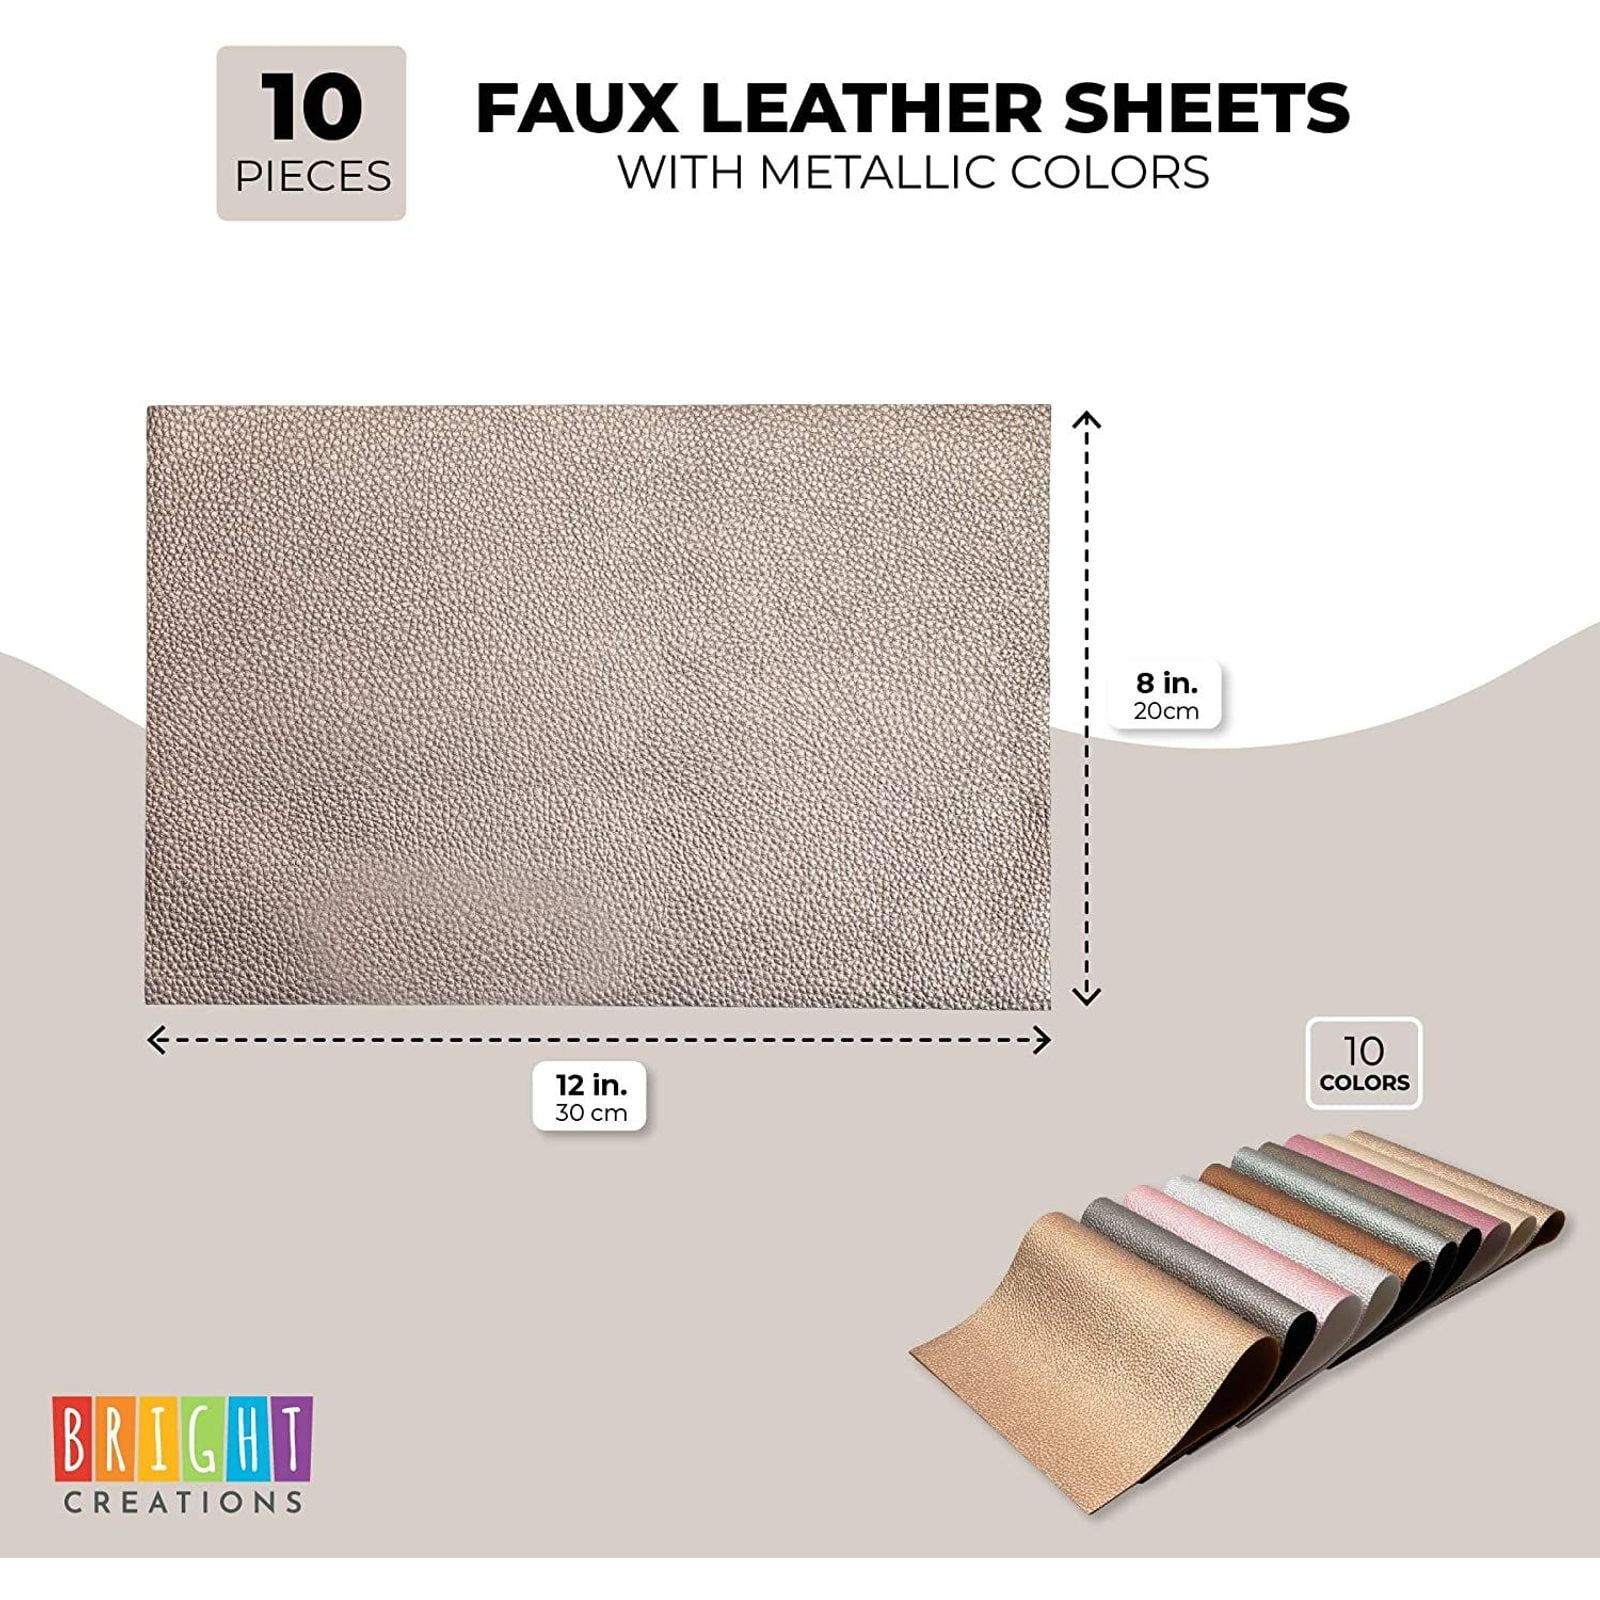 ZAIONE Solid Faux Leather Sheets: Grain Colors Leather 10Pcs 12x12 Inch  Solid Color Black White Brown Leather Sheets Bundle for Making